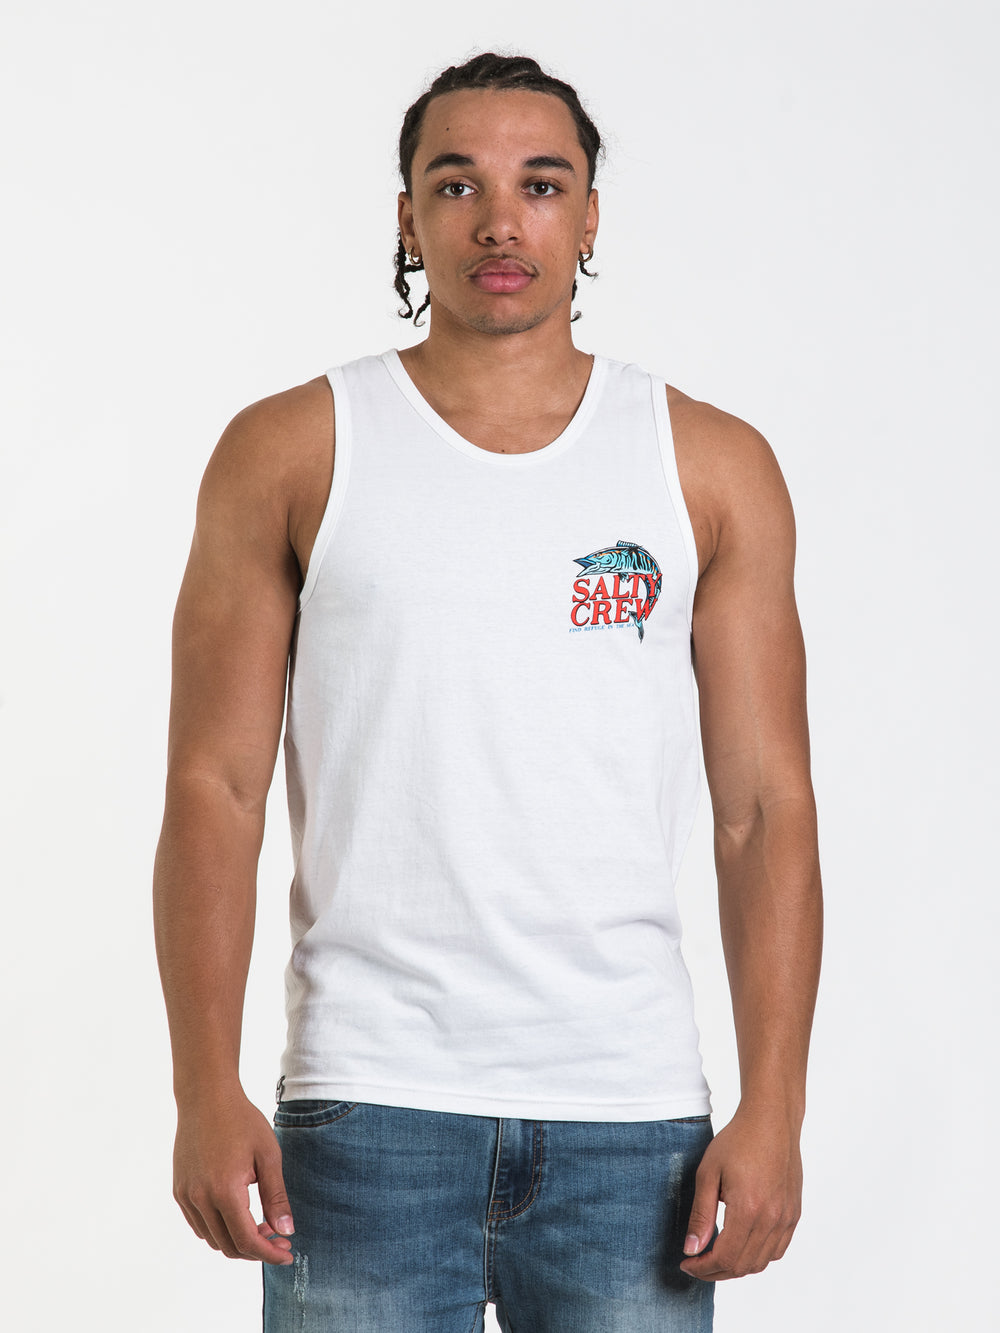 SALTY CREW OH NO Tank Top  - CLEARANCE